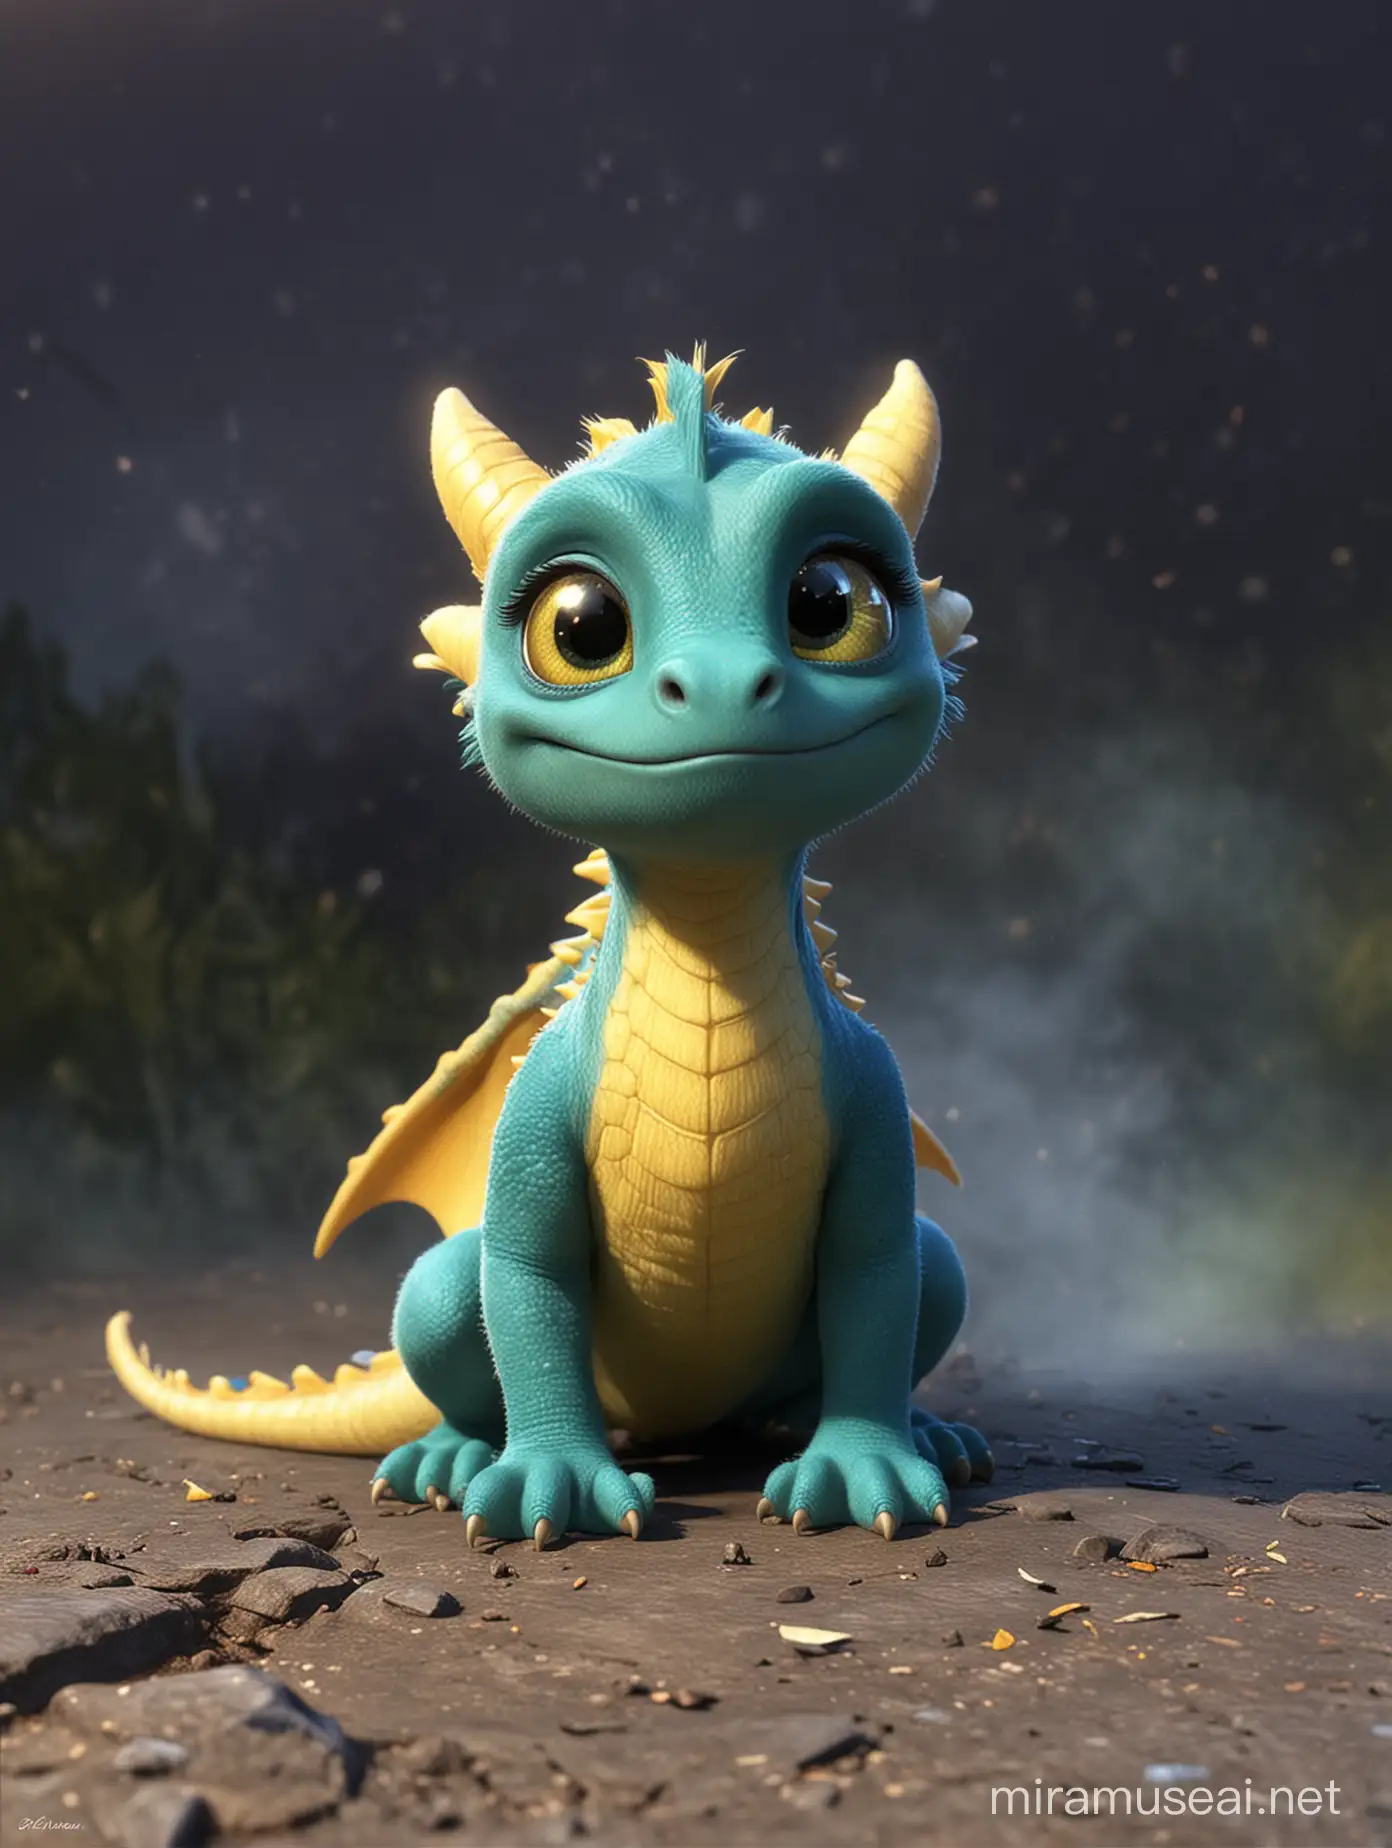 Art style: Pixar Animation
Subject: Sparky, a baby dragon
Description of Sparky: Small, with colorful scales that shimmer in shades of blue, green, and yellow. Sparky has large, expressive eyes filled with sadness.
Sparky the baby dragon was different. Unlike his brothers and sisters who blew fiery whooshes that roasted berries, Sparky only puffed out little puffs of smoke. He felt sad and left out during firefly games, unable to light up the night sky like his siblings.